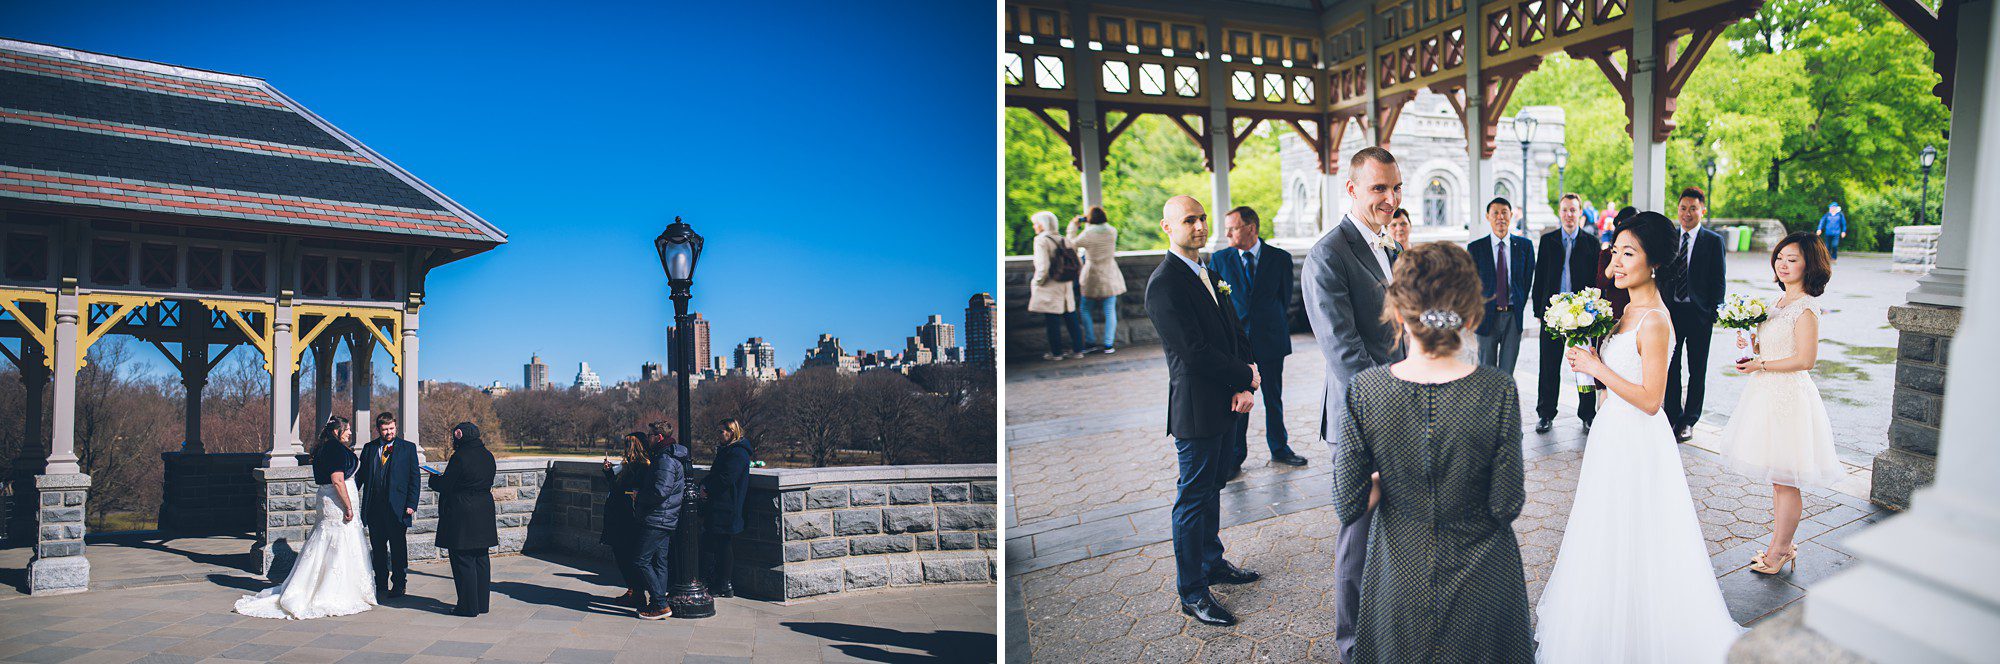 Best places to get married in Central Park Belvedere Castle